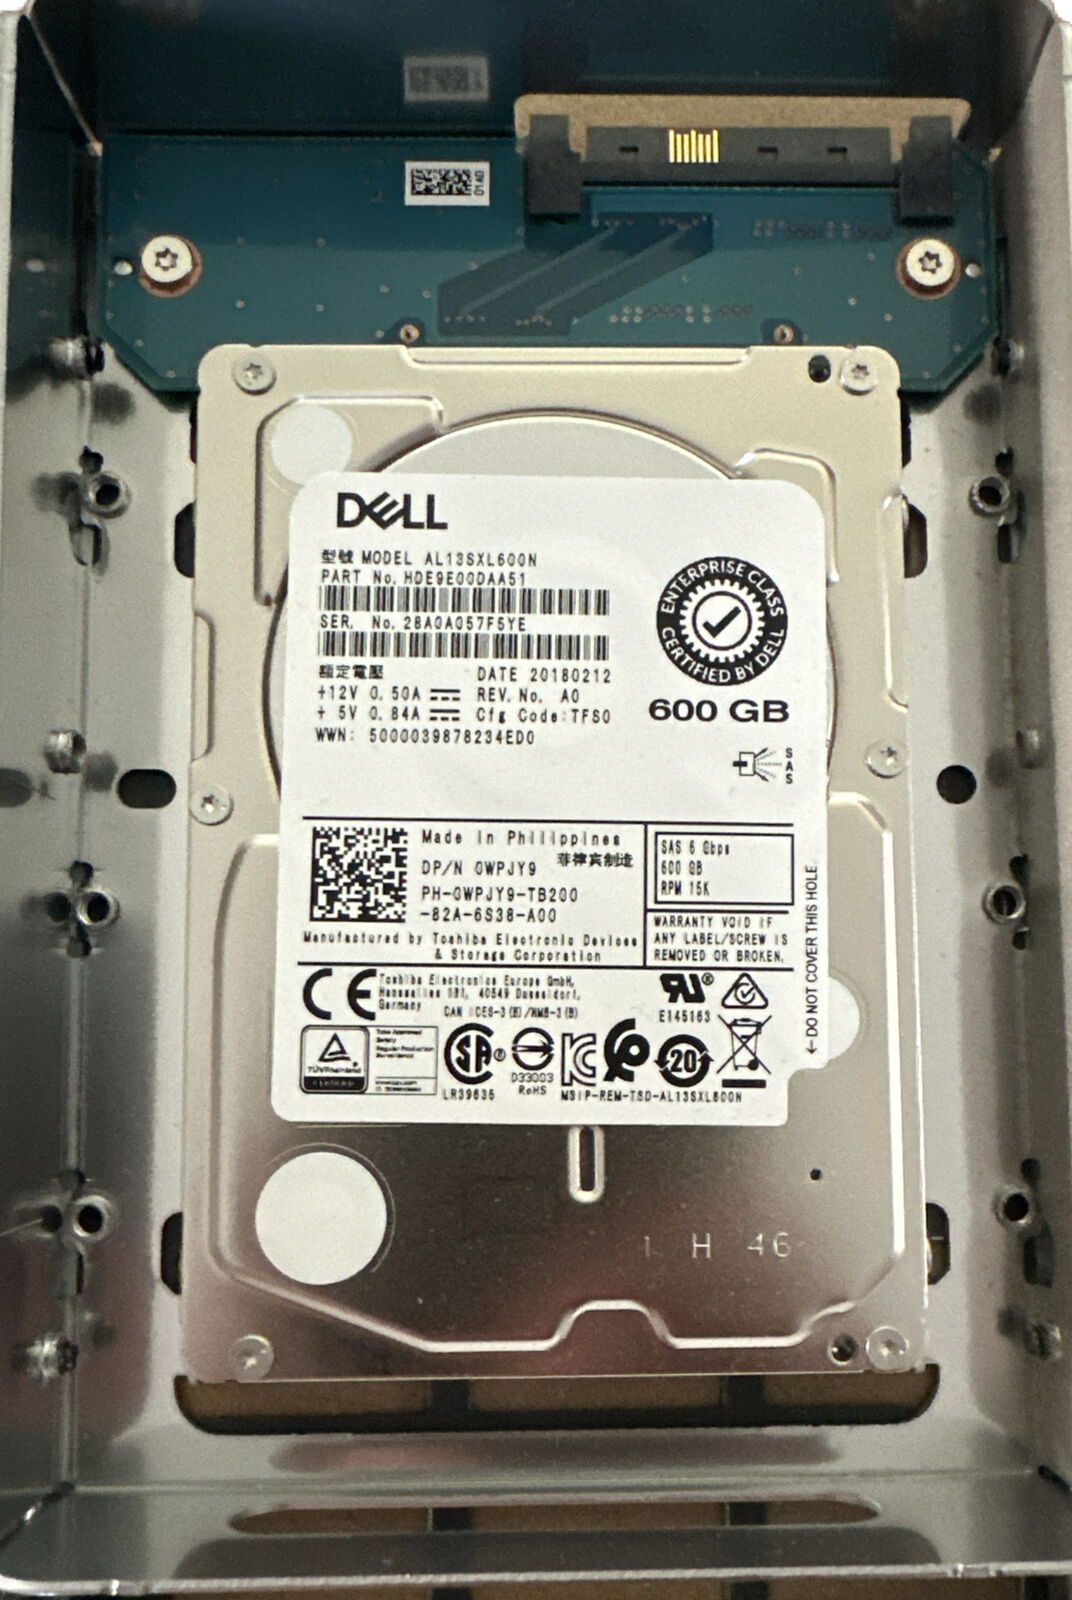 Dell 600GB,Internal,15000 RPM,2.5 inch (OWPJY9) Hard Disk Drive Dell 3.5” Tray